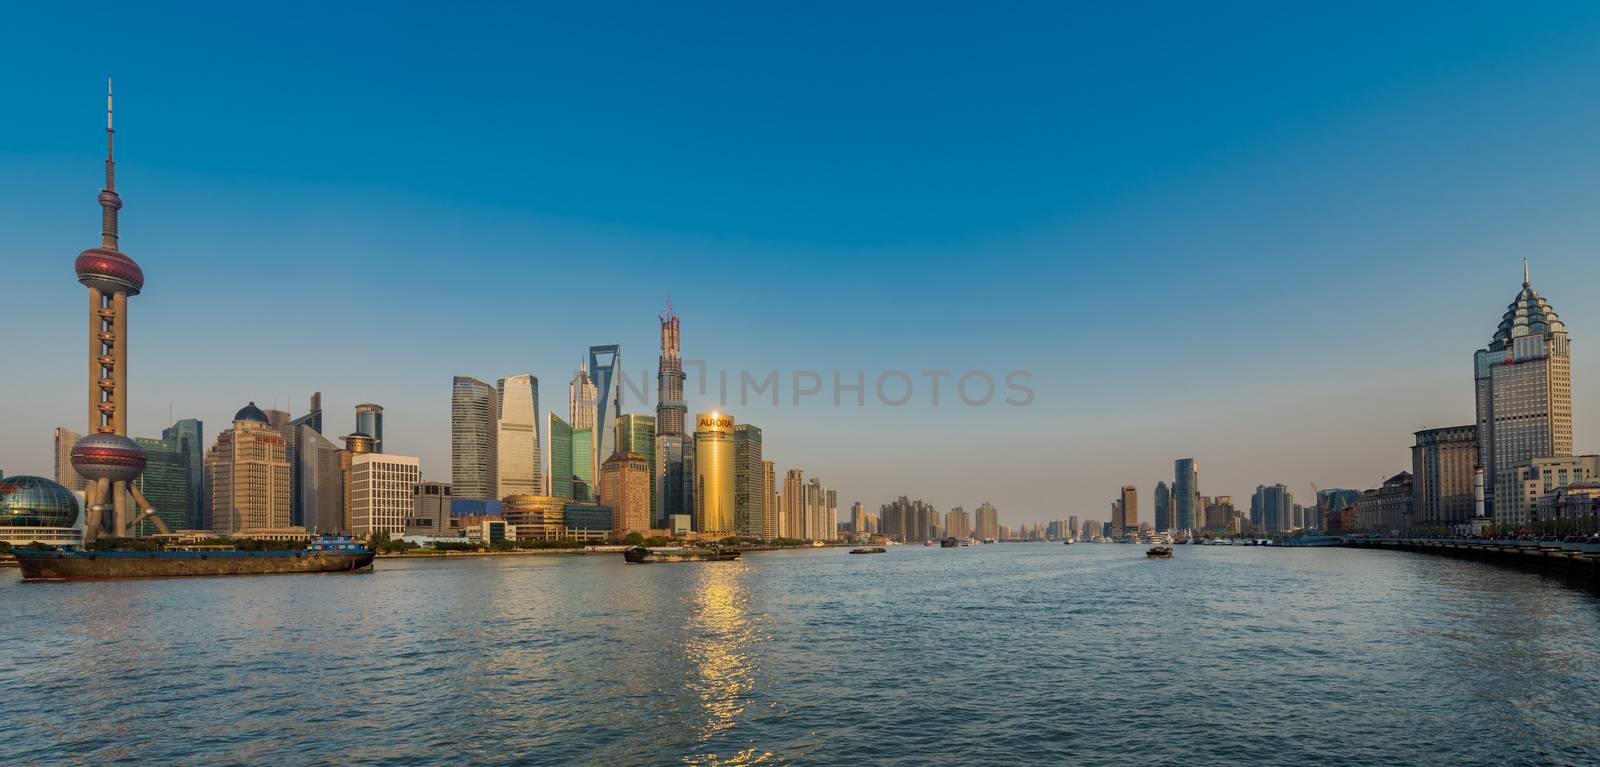 Shanghai, China - April 7, 2013: pudong and the bund on hangpu river shanghai china at the city of Shanghai in China on april 7th, 2013